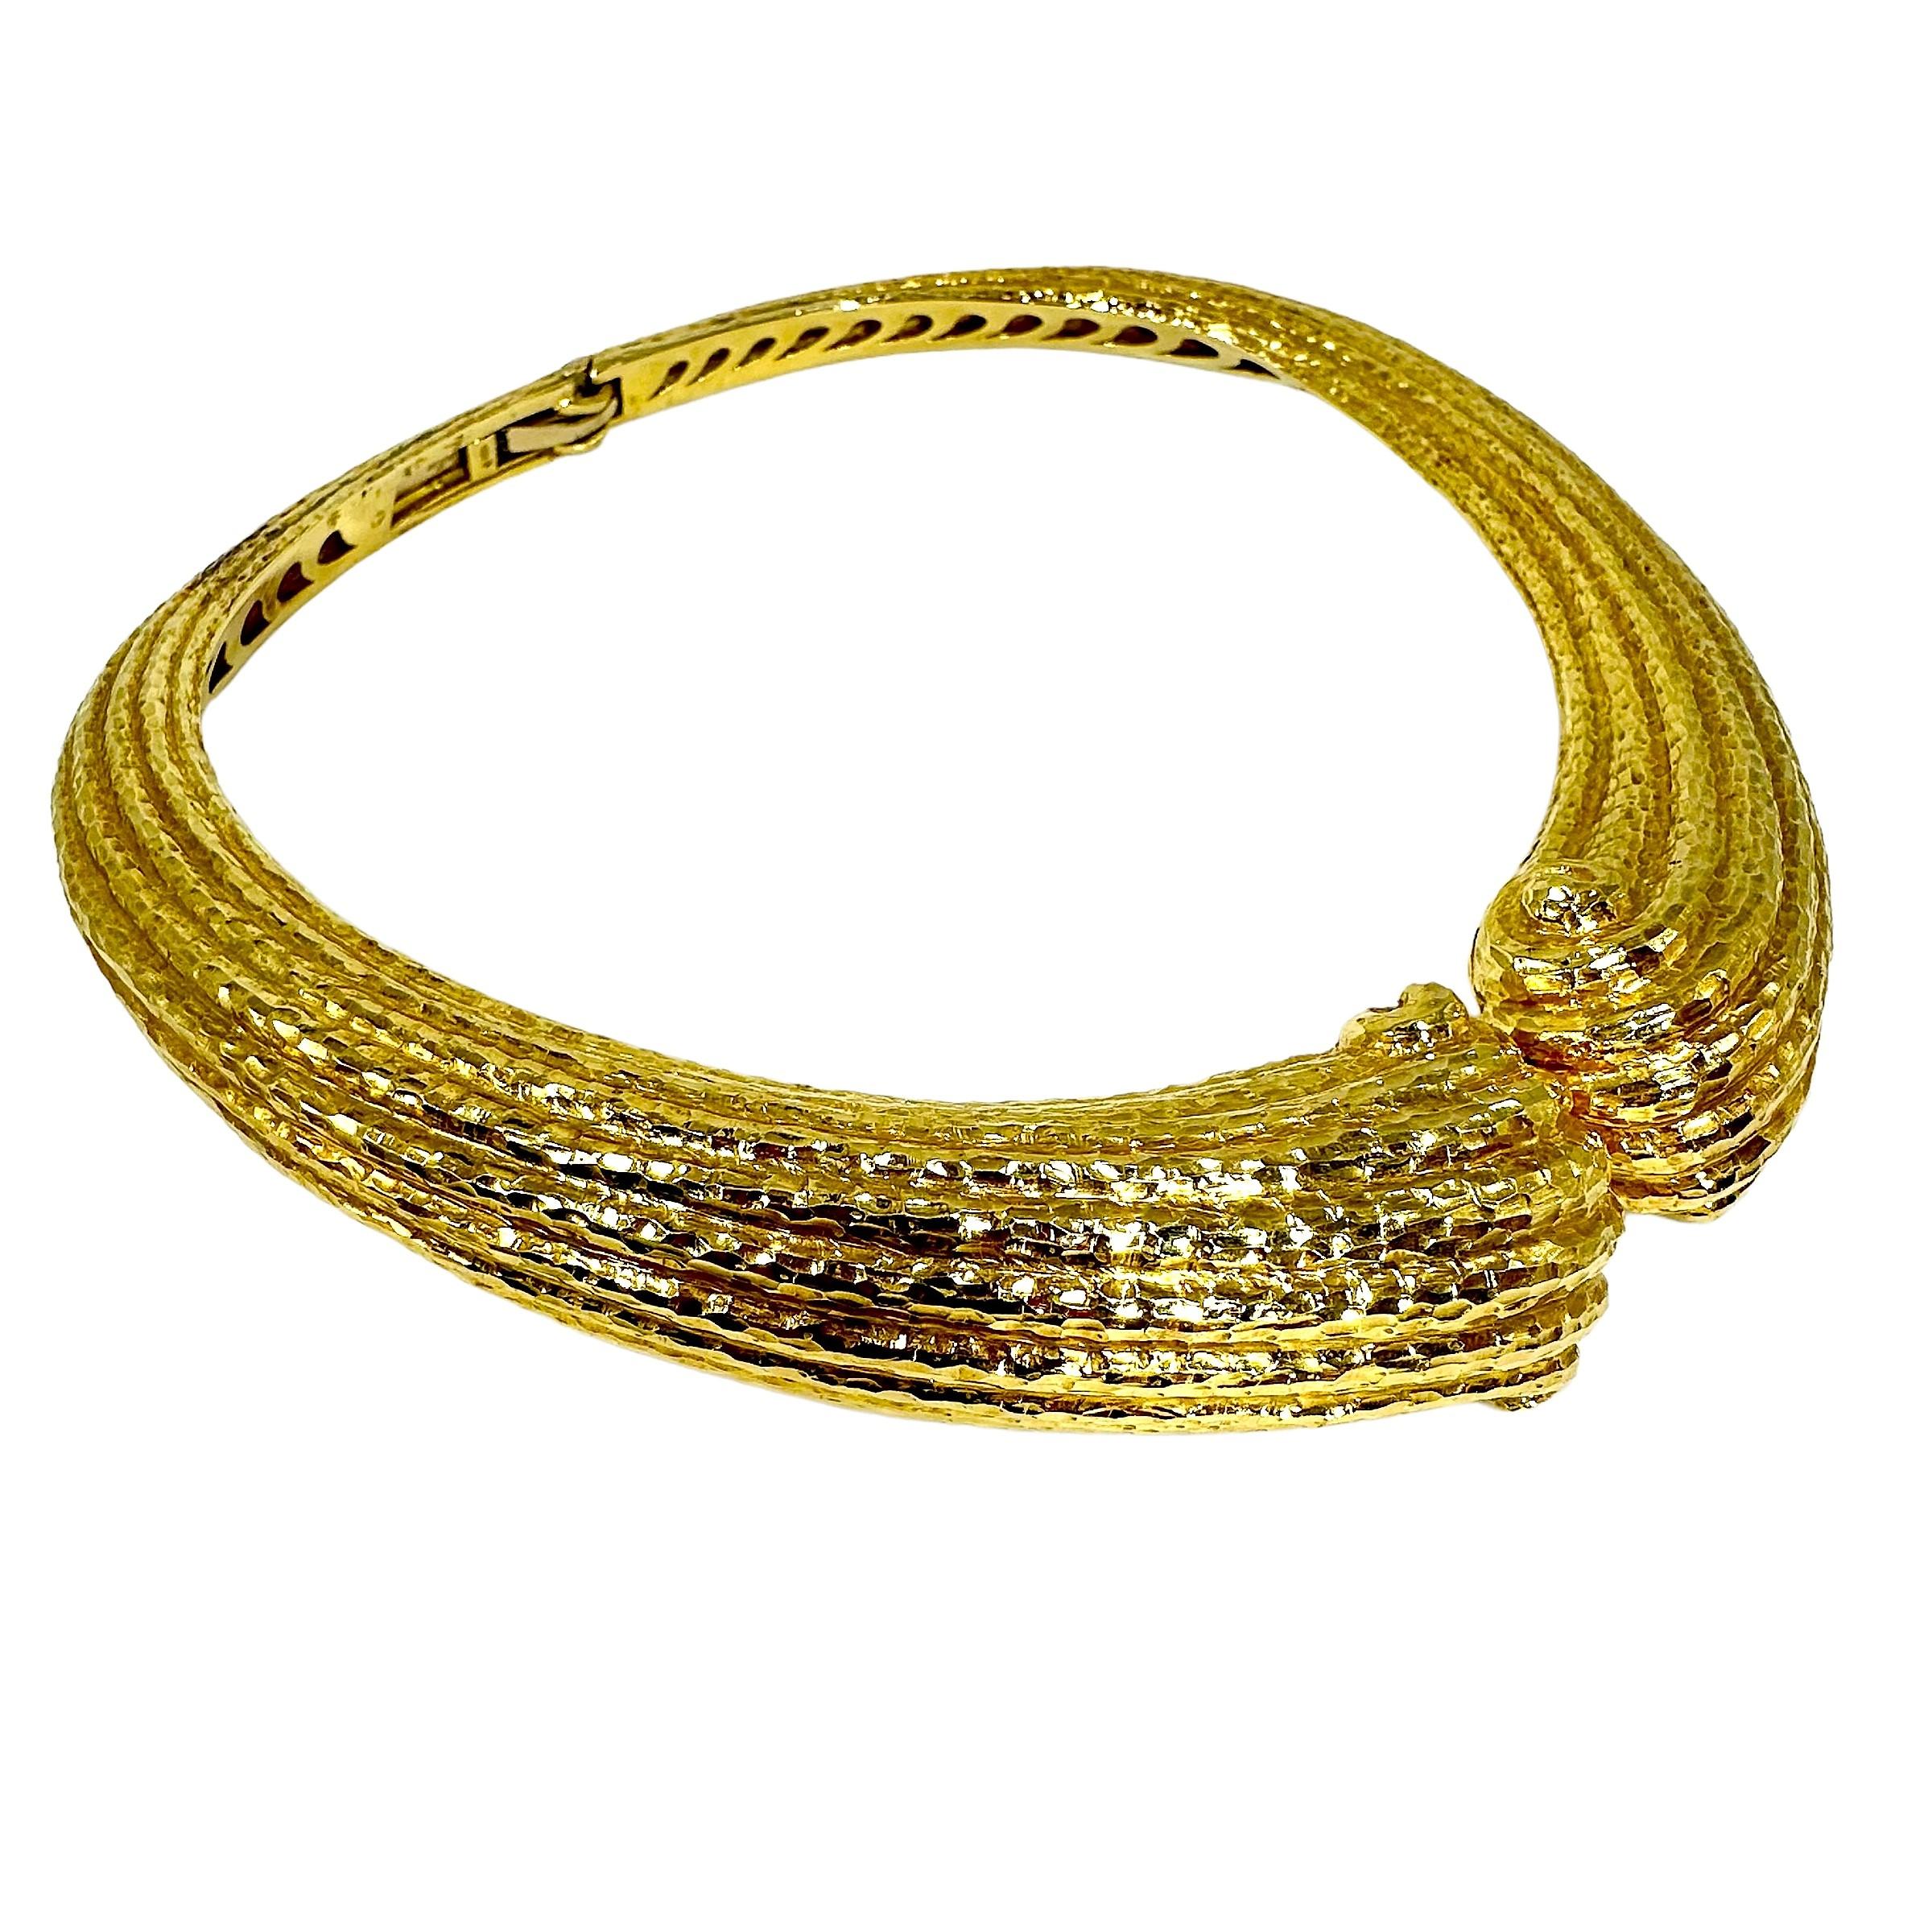 This massive and striking 18K yellow gold Italian choker necklace was manufactured during the Mid-20th Century, to the very highest standards of the gold crafting art. It is finished on all of it's frontal surfaces with a deeply chiseled, hammered